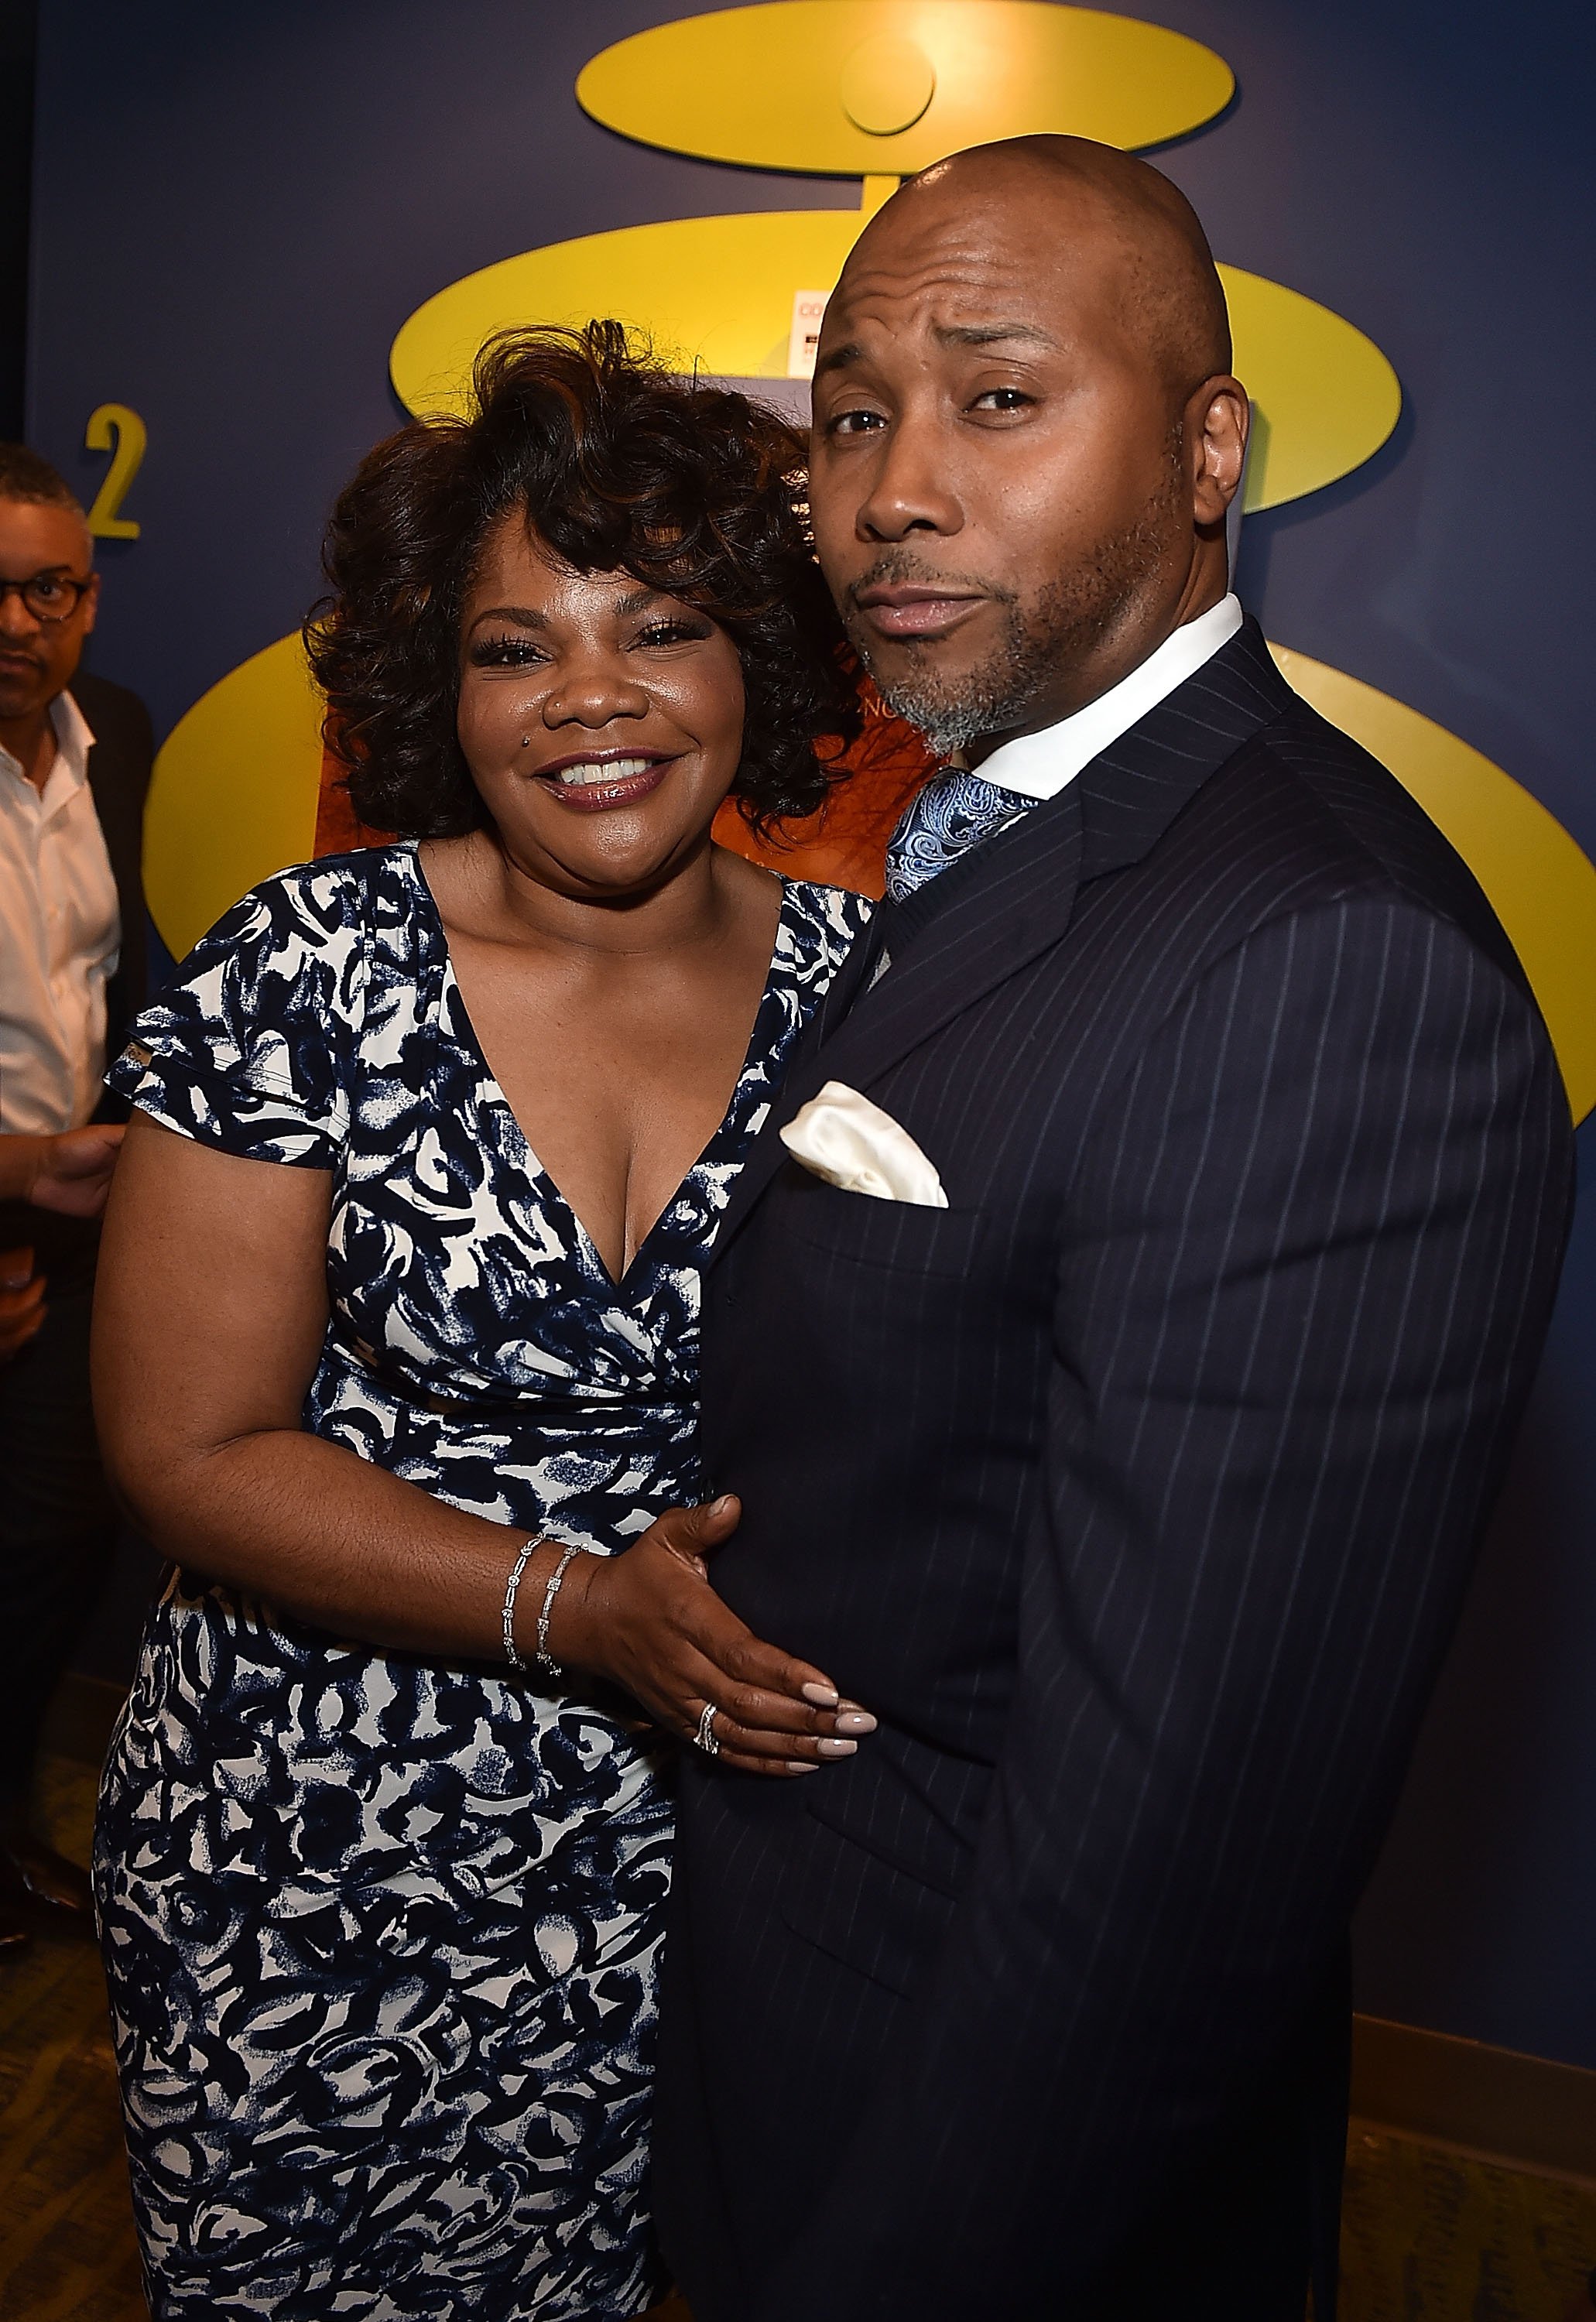 Mo'Nique and her husband, Sidney Hicks at the premiere of "Blackbird" in April 2015. | Photo: Getty Images